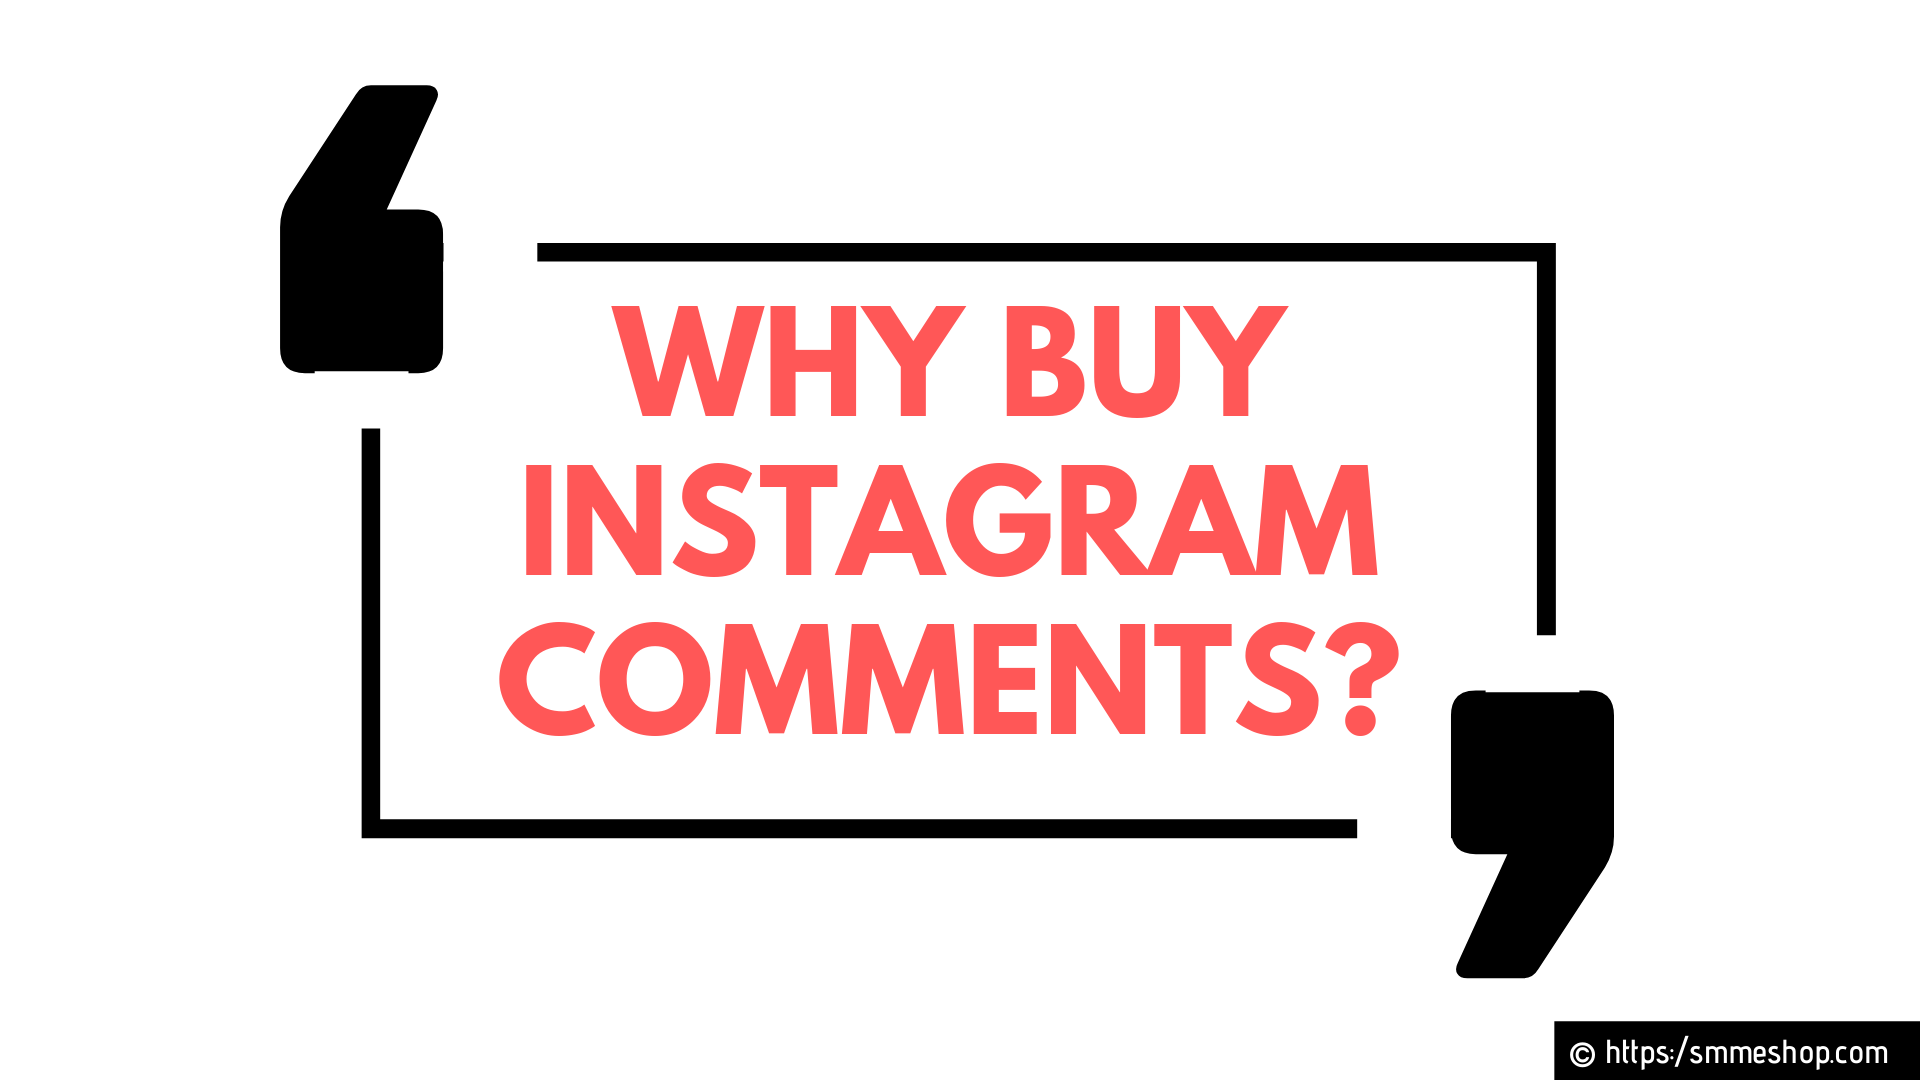 Why buy Instagram comments?